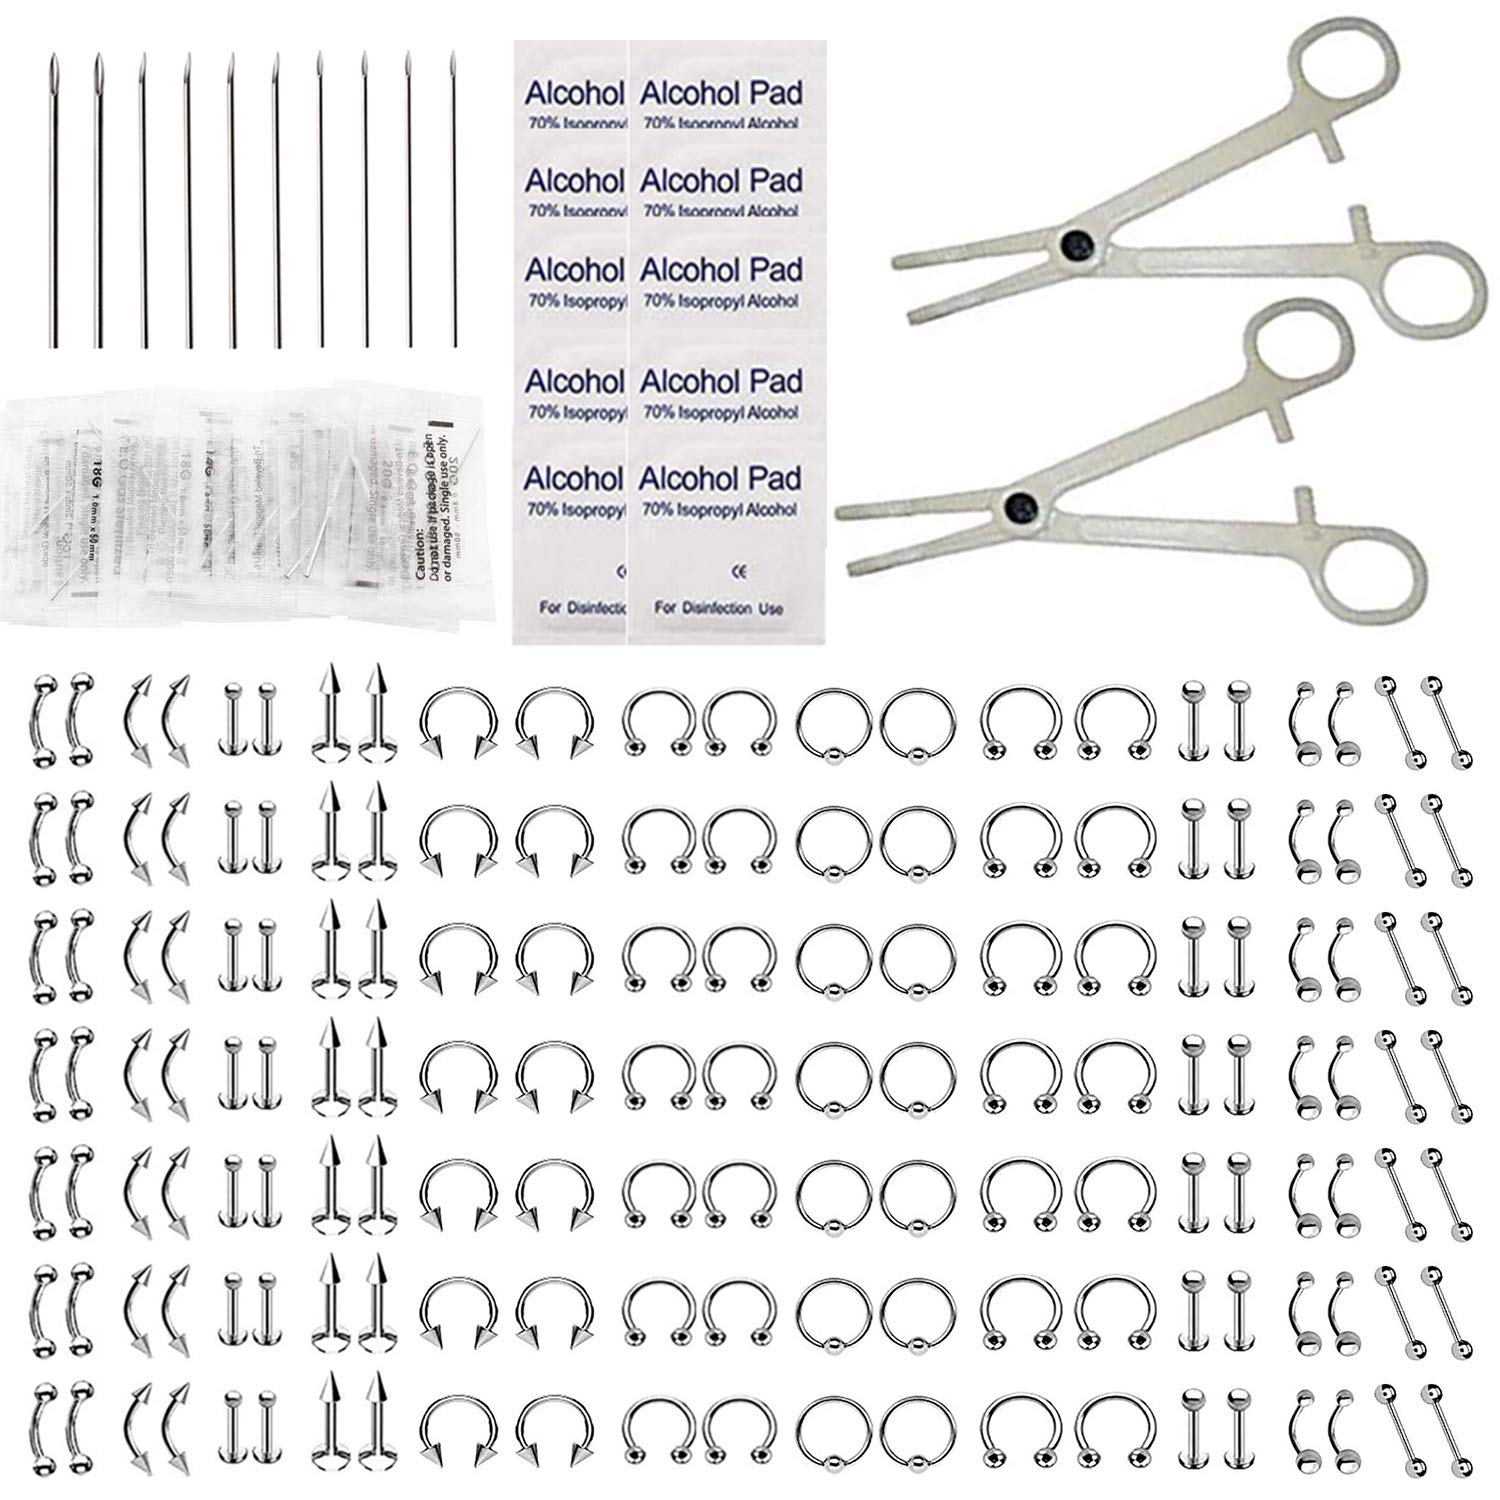 Romlon Piercing Kits - 198Pcs Professional Piercing Kit Surgical Steel Piercing Jewelry Kit 14G 16G 18G Piercing Needles Disposable Piercing Clamps Belly Ring Tongue Tragus Nose for Piercing